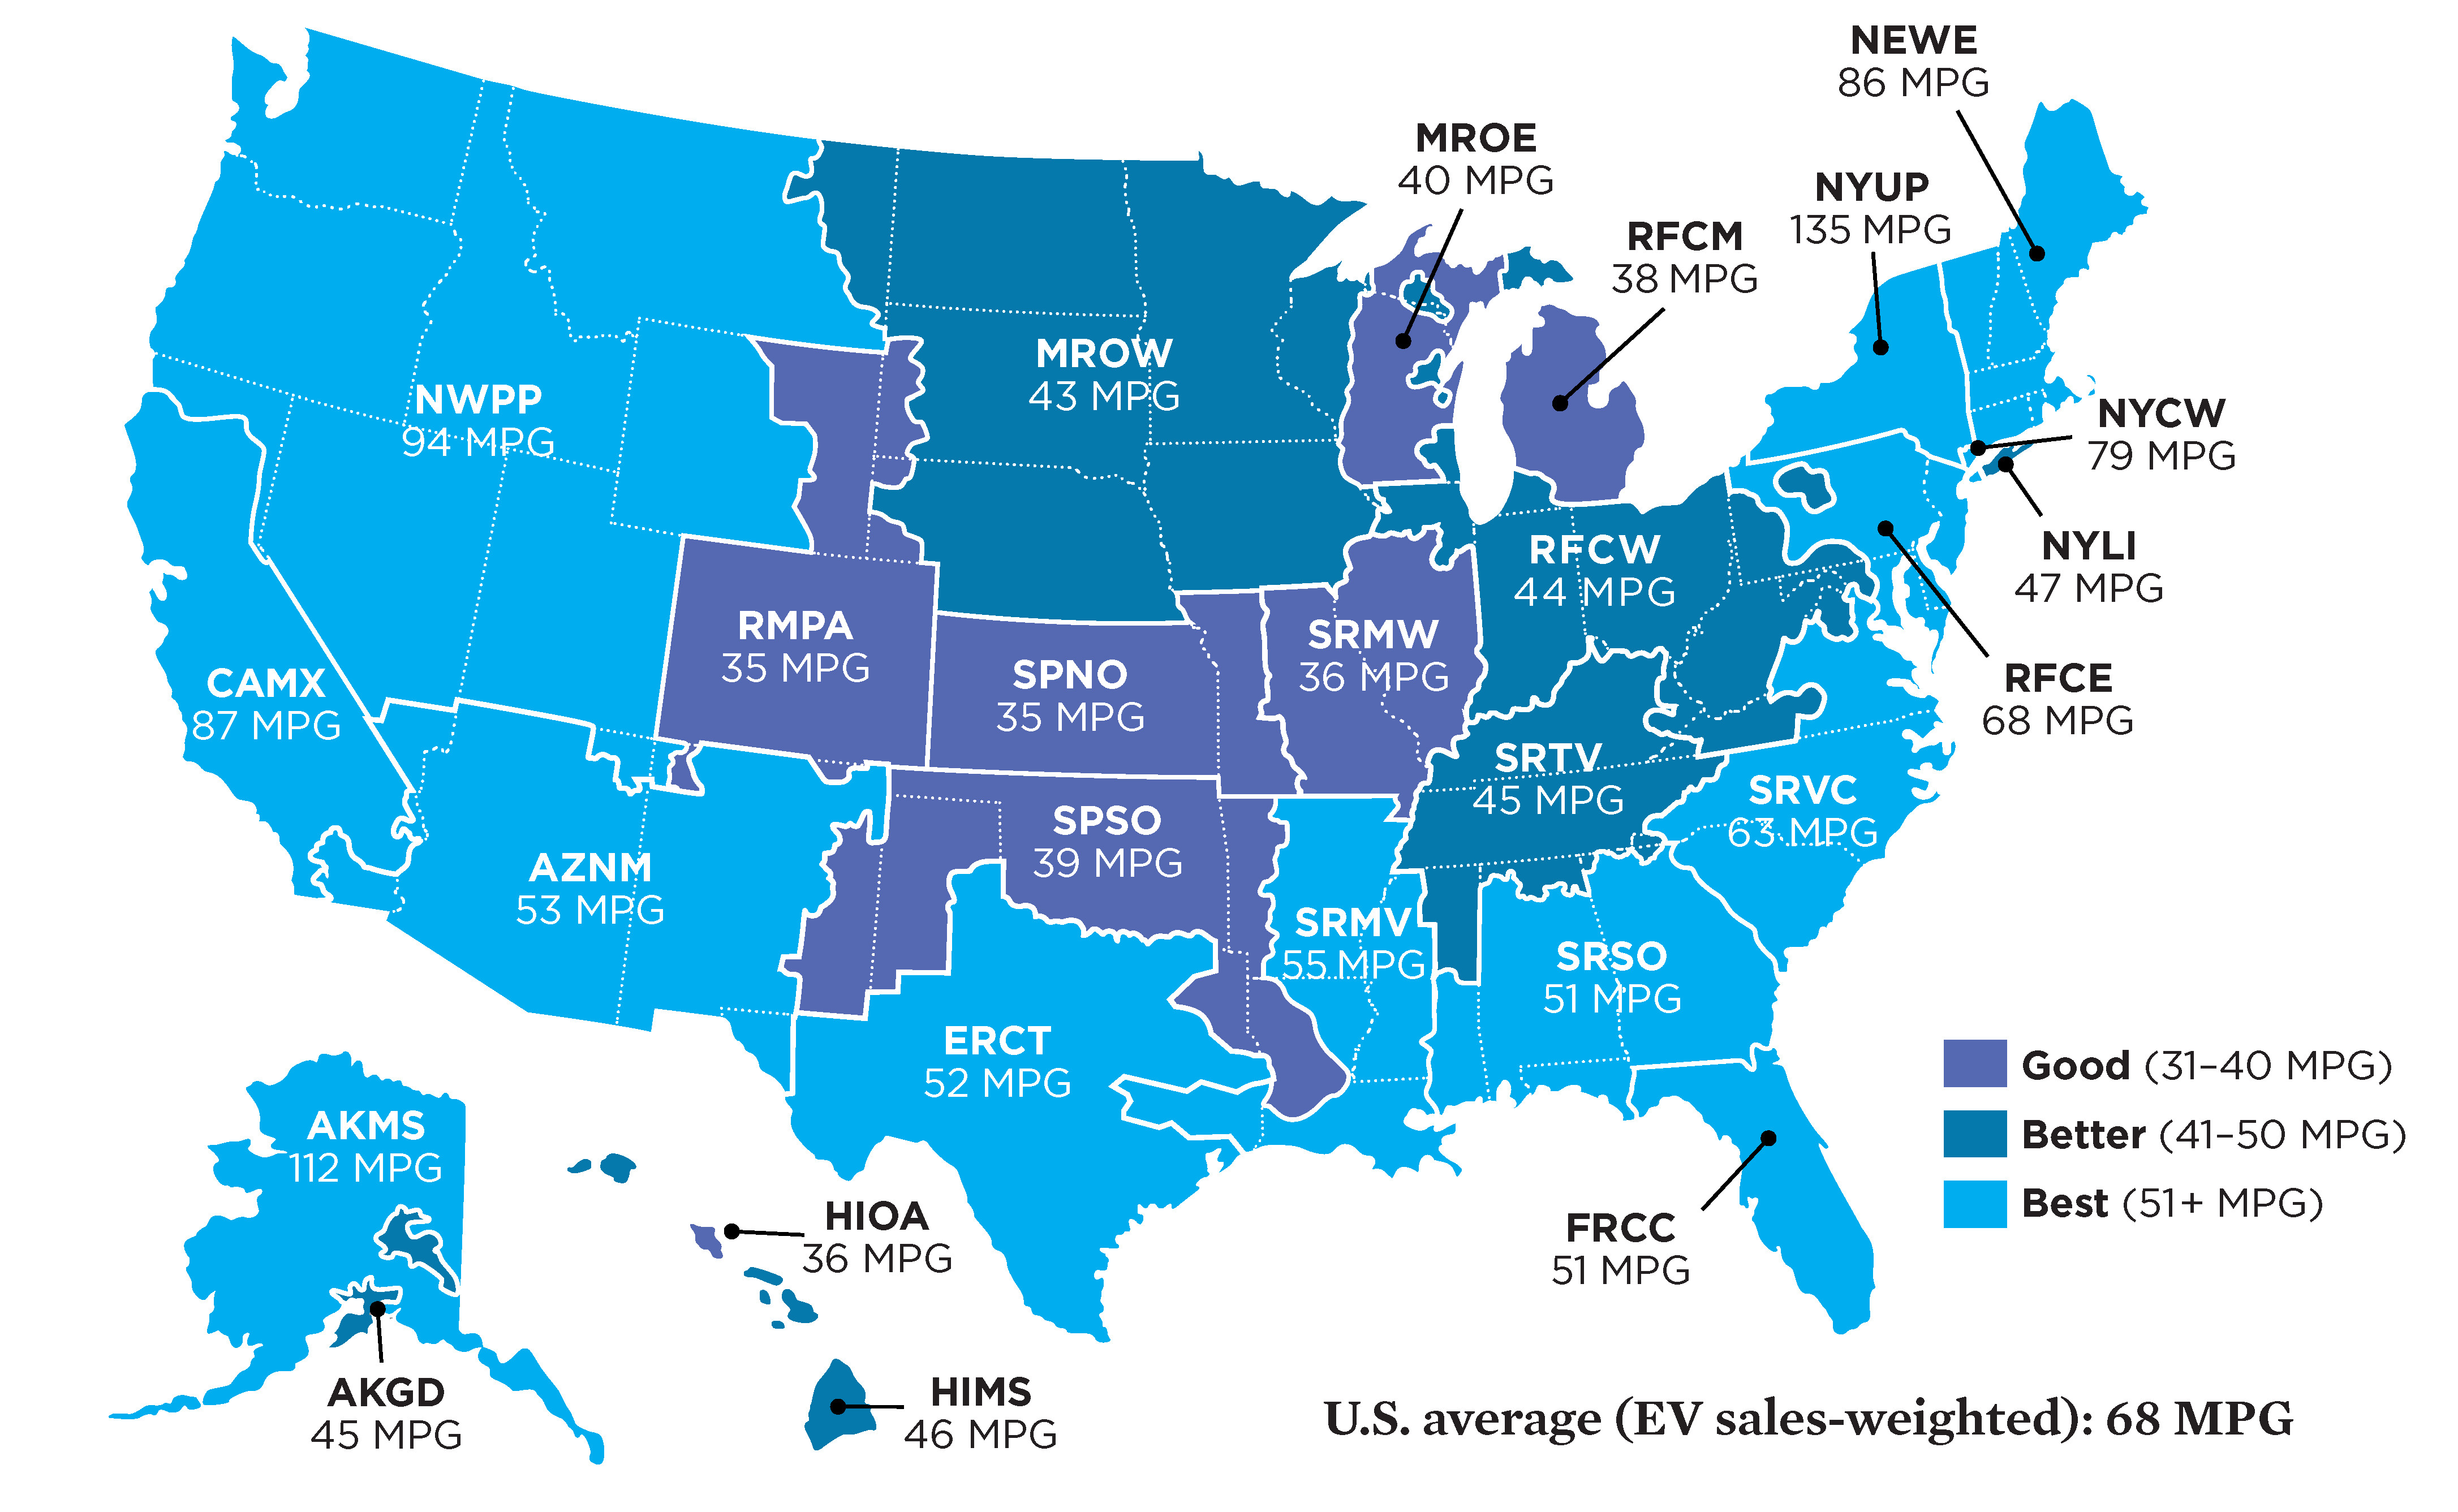 Electric Vehicle Global Warming Pollution Ratings and Gasoline Vehicle Emissions Equivalents by Electricity Grid Region. Image: Union of Concerned Scientists, 2015.